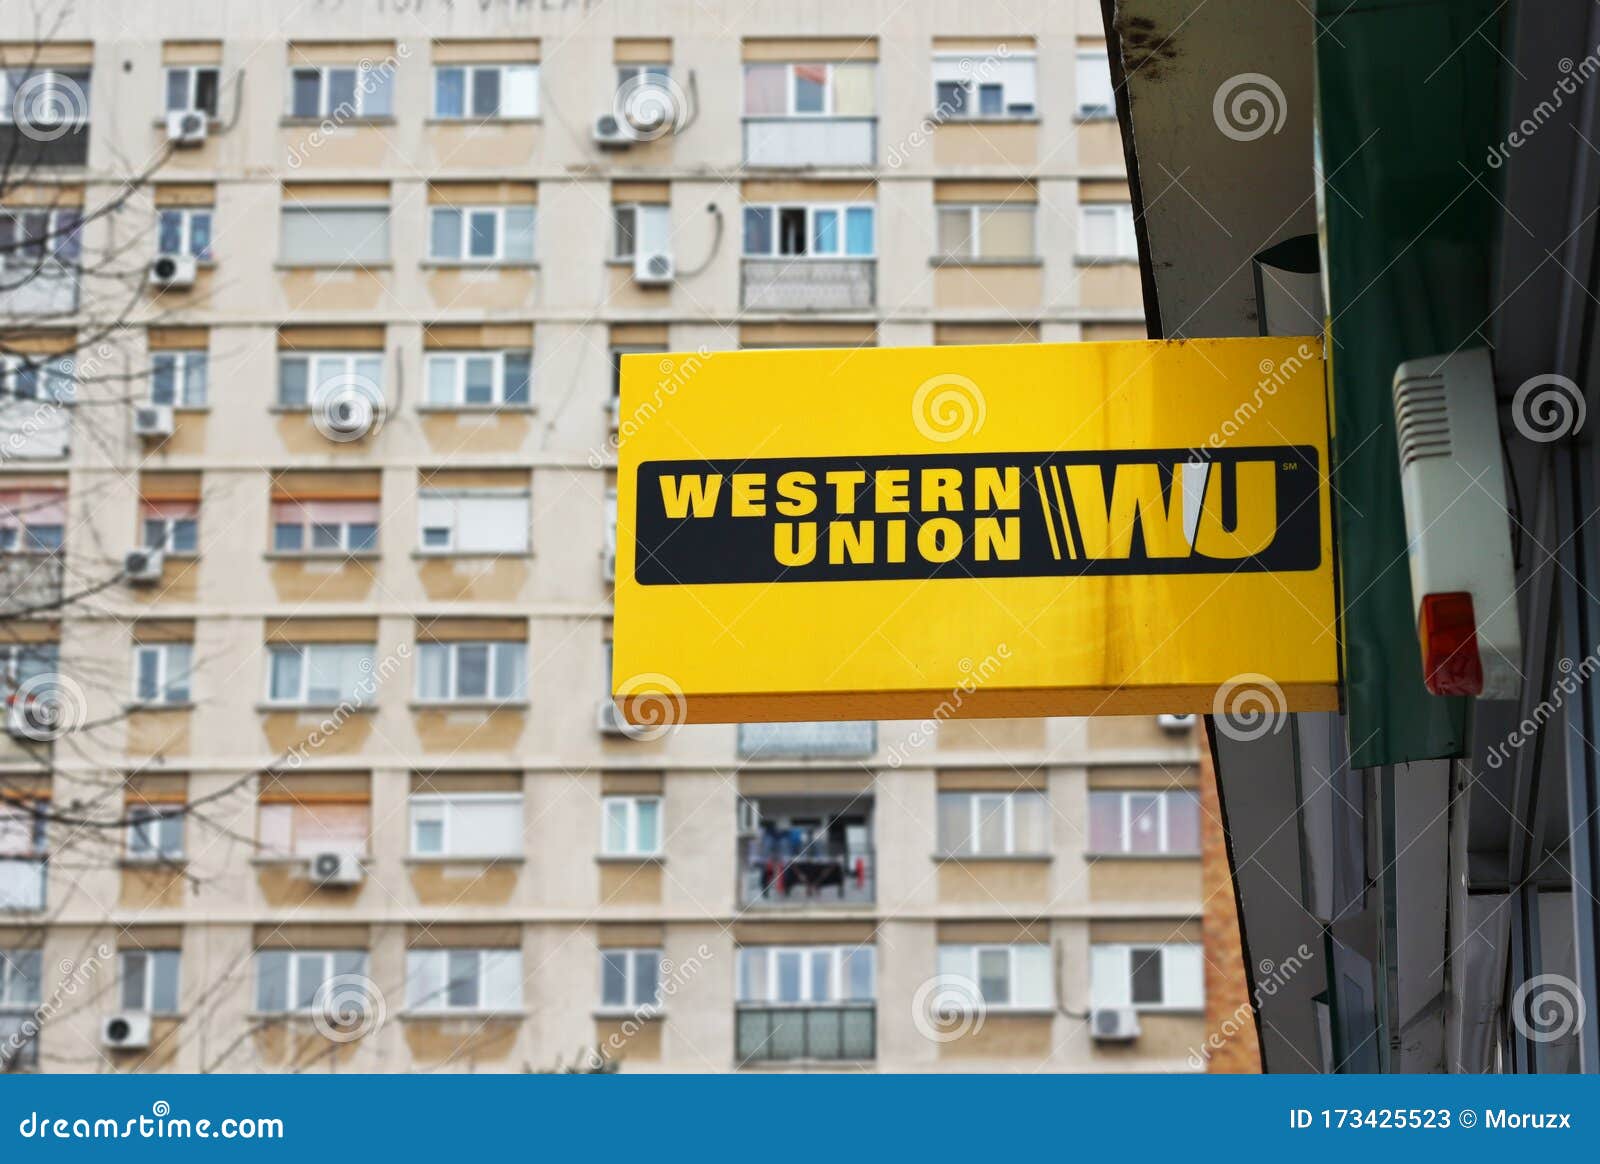 132 Western Union Money Transfer Photos Free Royalty Free Stock Photos From Dreamstime